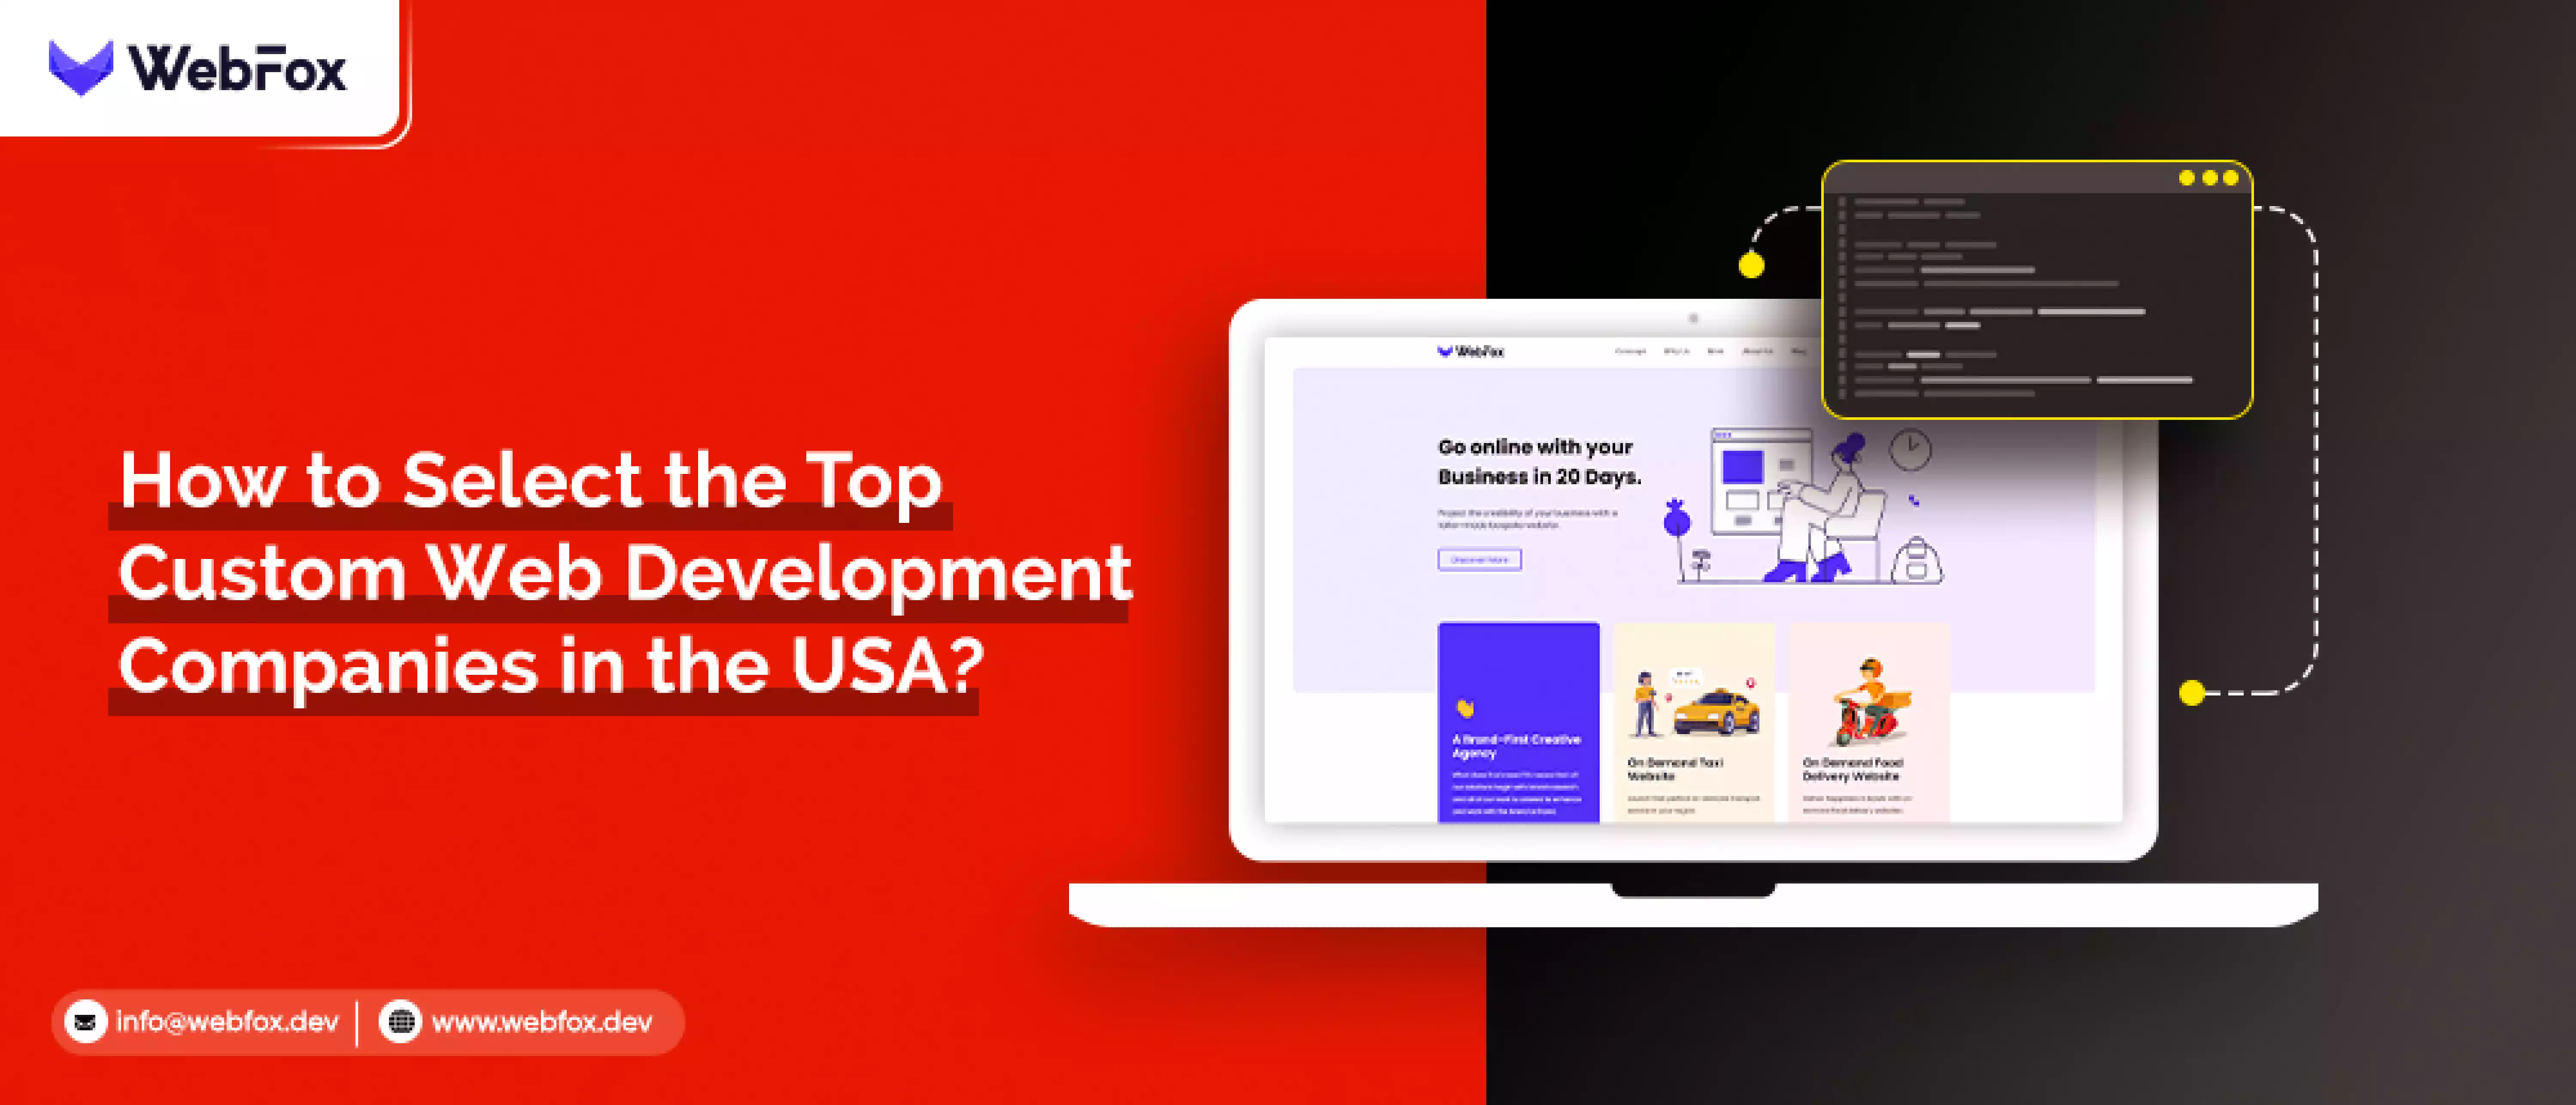 How to select the top custom web development companies in the USA